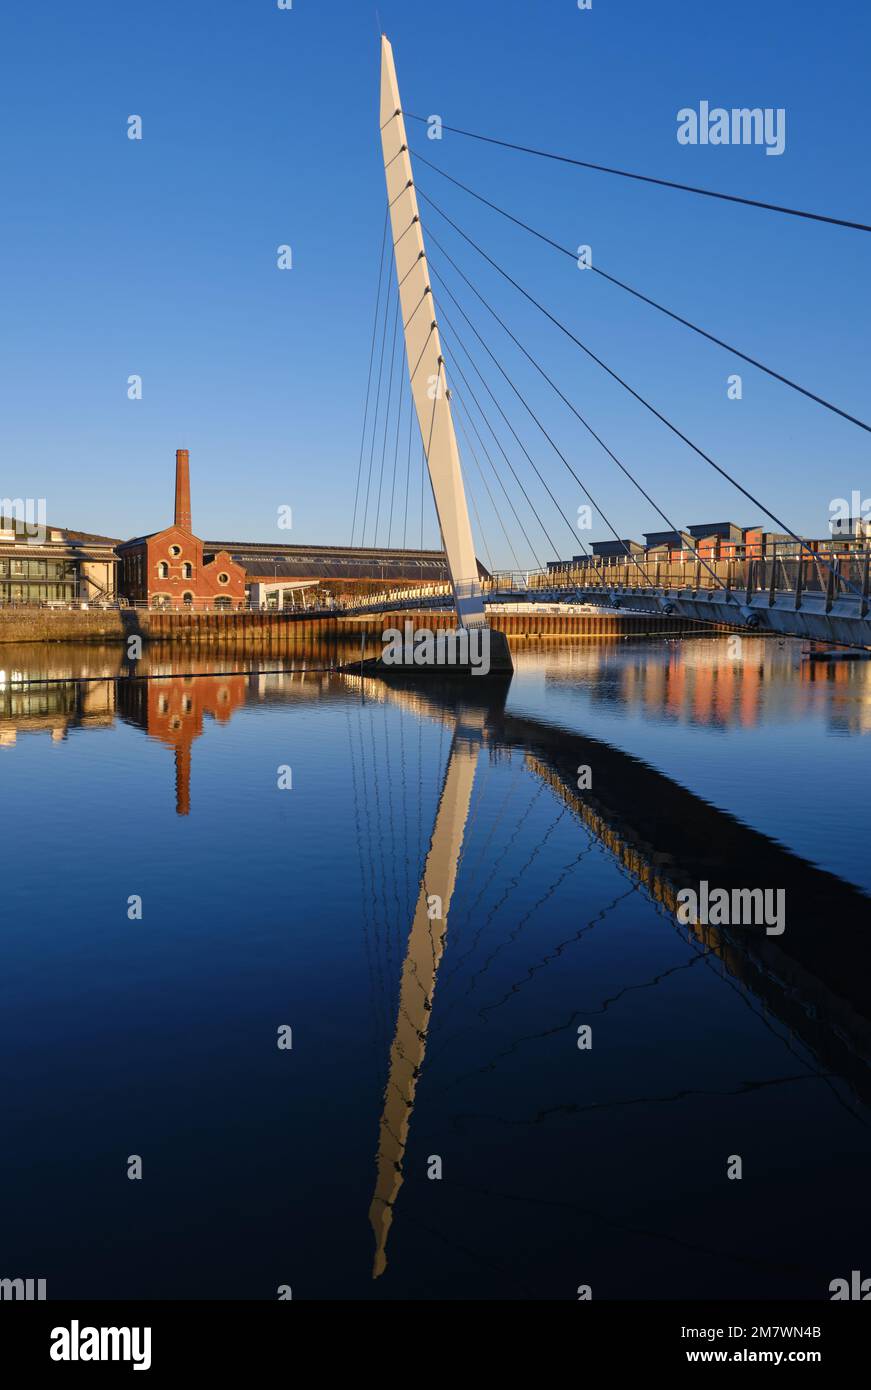 The Sail Bridge over the river Tawe in Swansea, part of the redevelopment of the city's docks Stock Photo